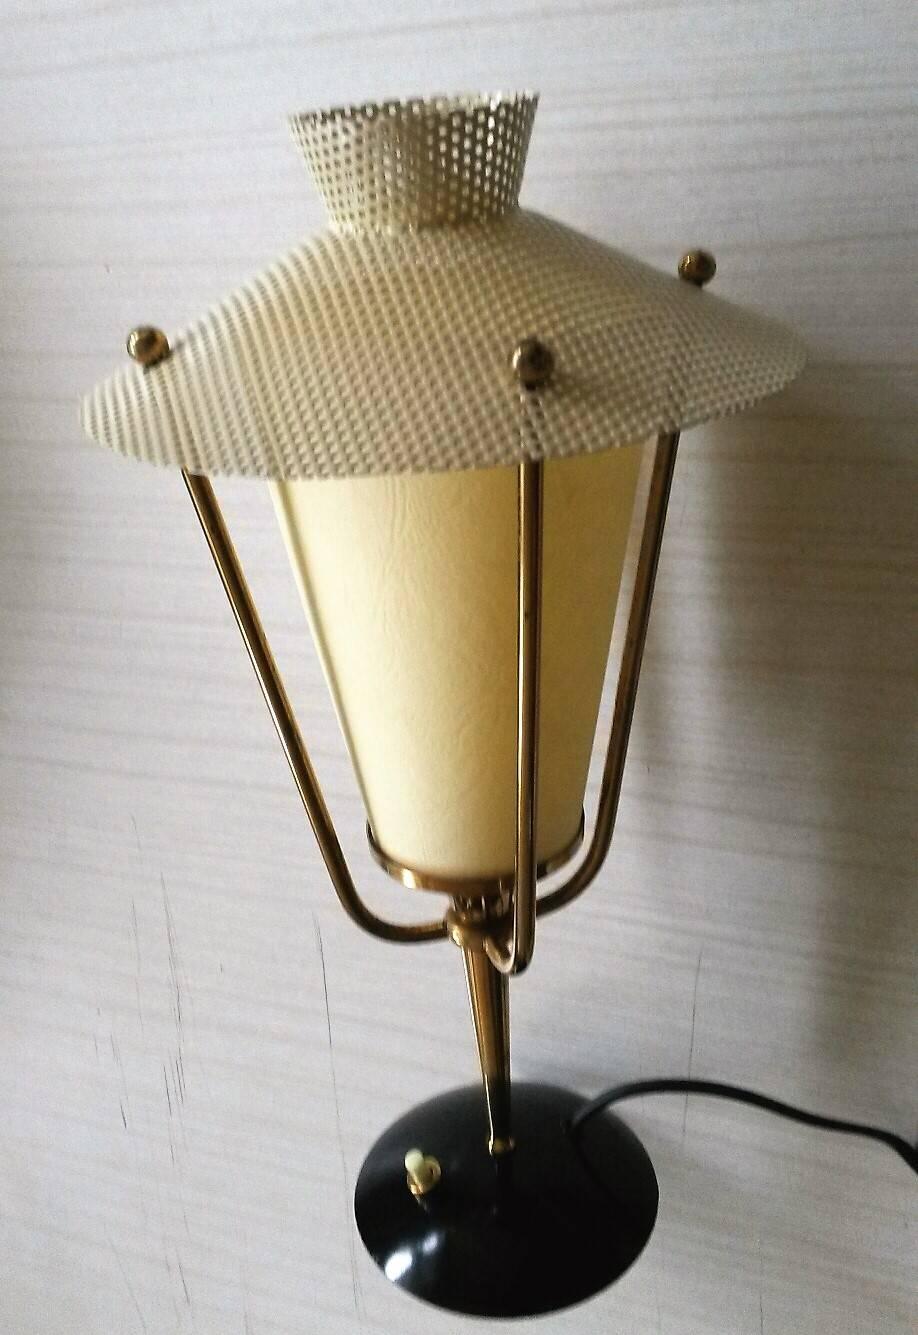 Pair of French table or night lamps by Maison Arlus, in brass and perforated sheet metal in a great Ivory color and rhodoid lampshades.
France, circa 1950.

Brand new checked and wired, max 40 watts max each.
Dimensions:
Height 34 cm
width 18